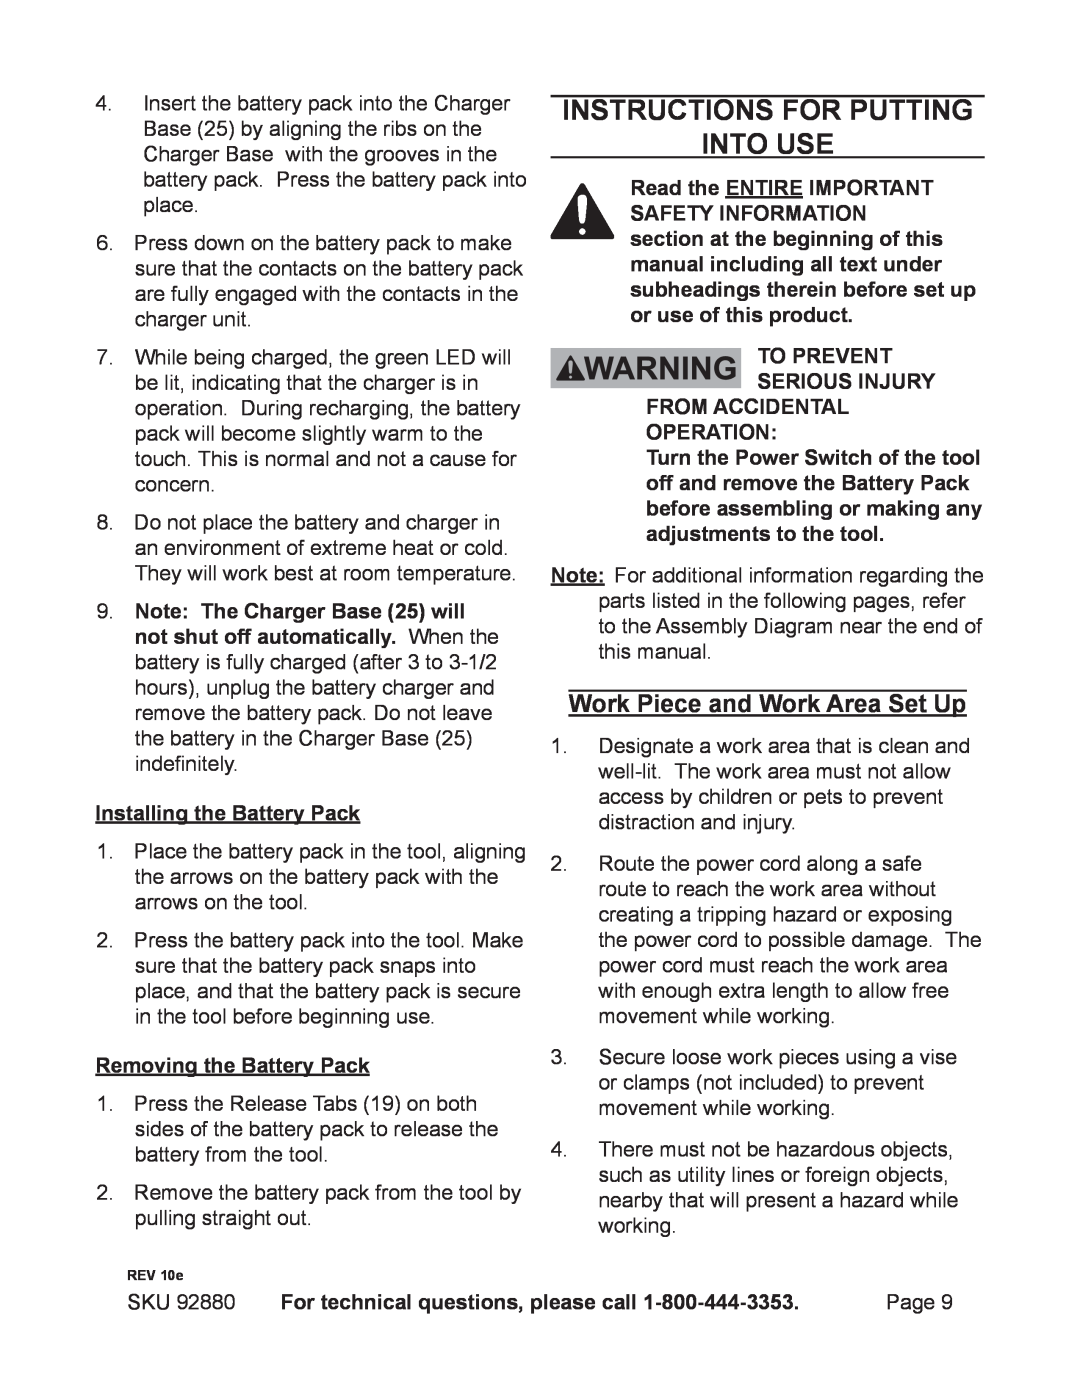 Chicago Electric 92880 operating instructions Instructions for putting into use, Work Piece and Work Area Set Up 